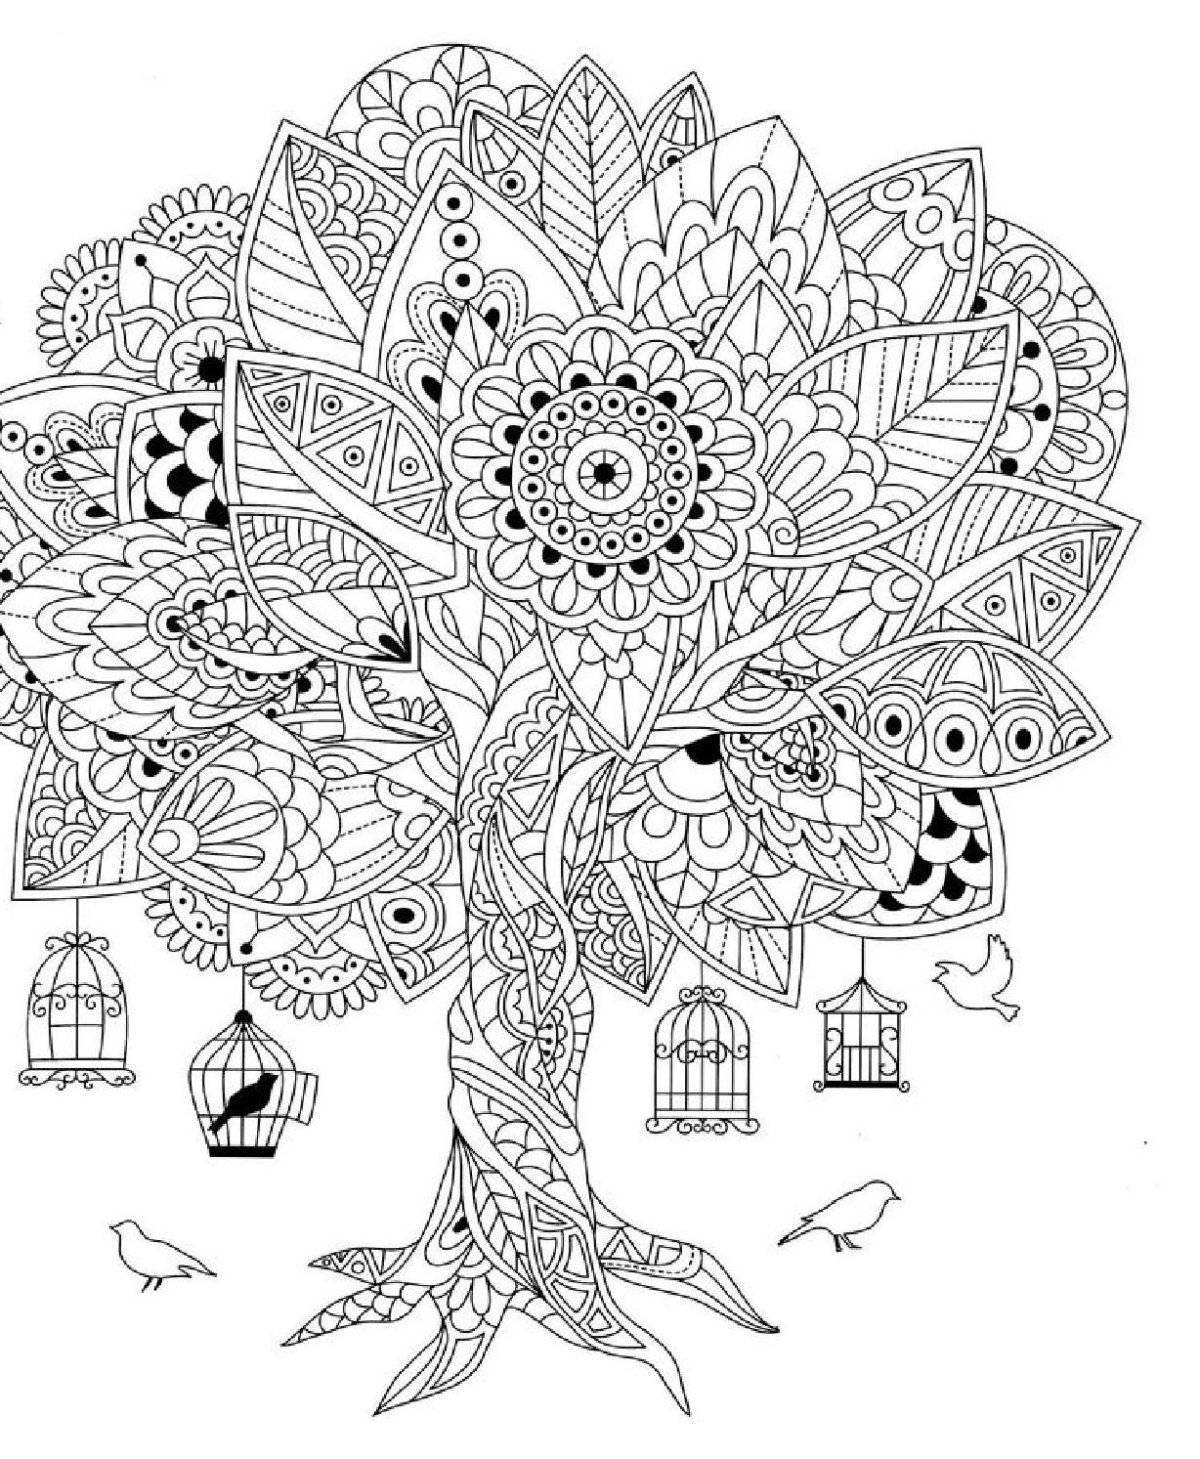 Harmonious meditative coloring book for adults